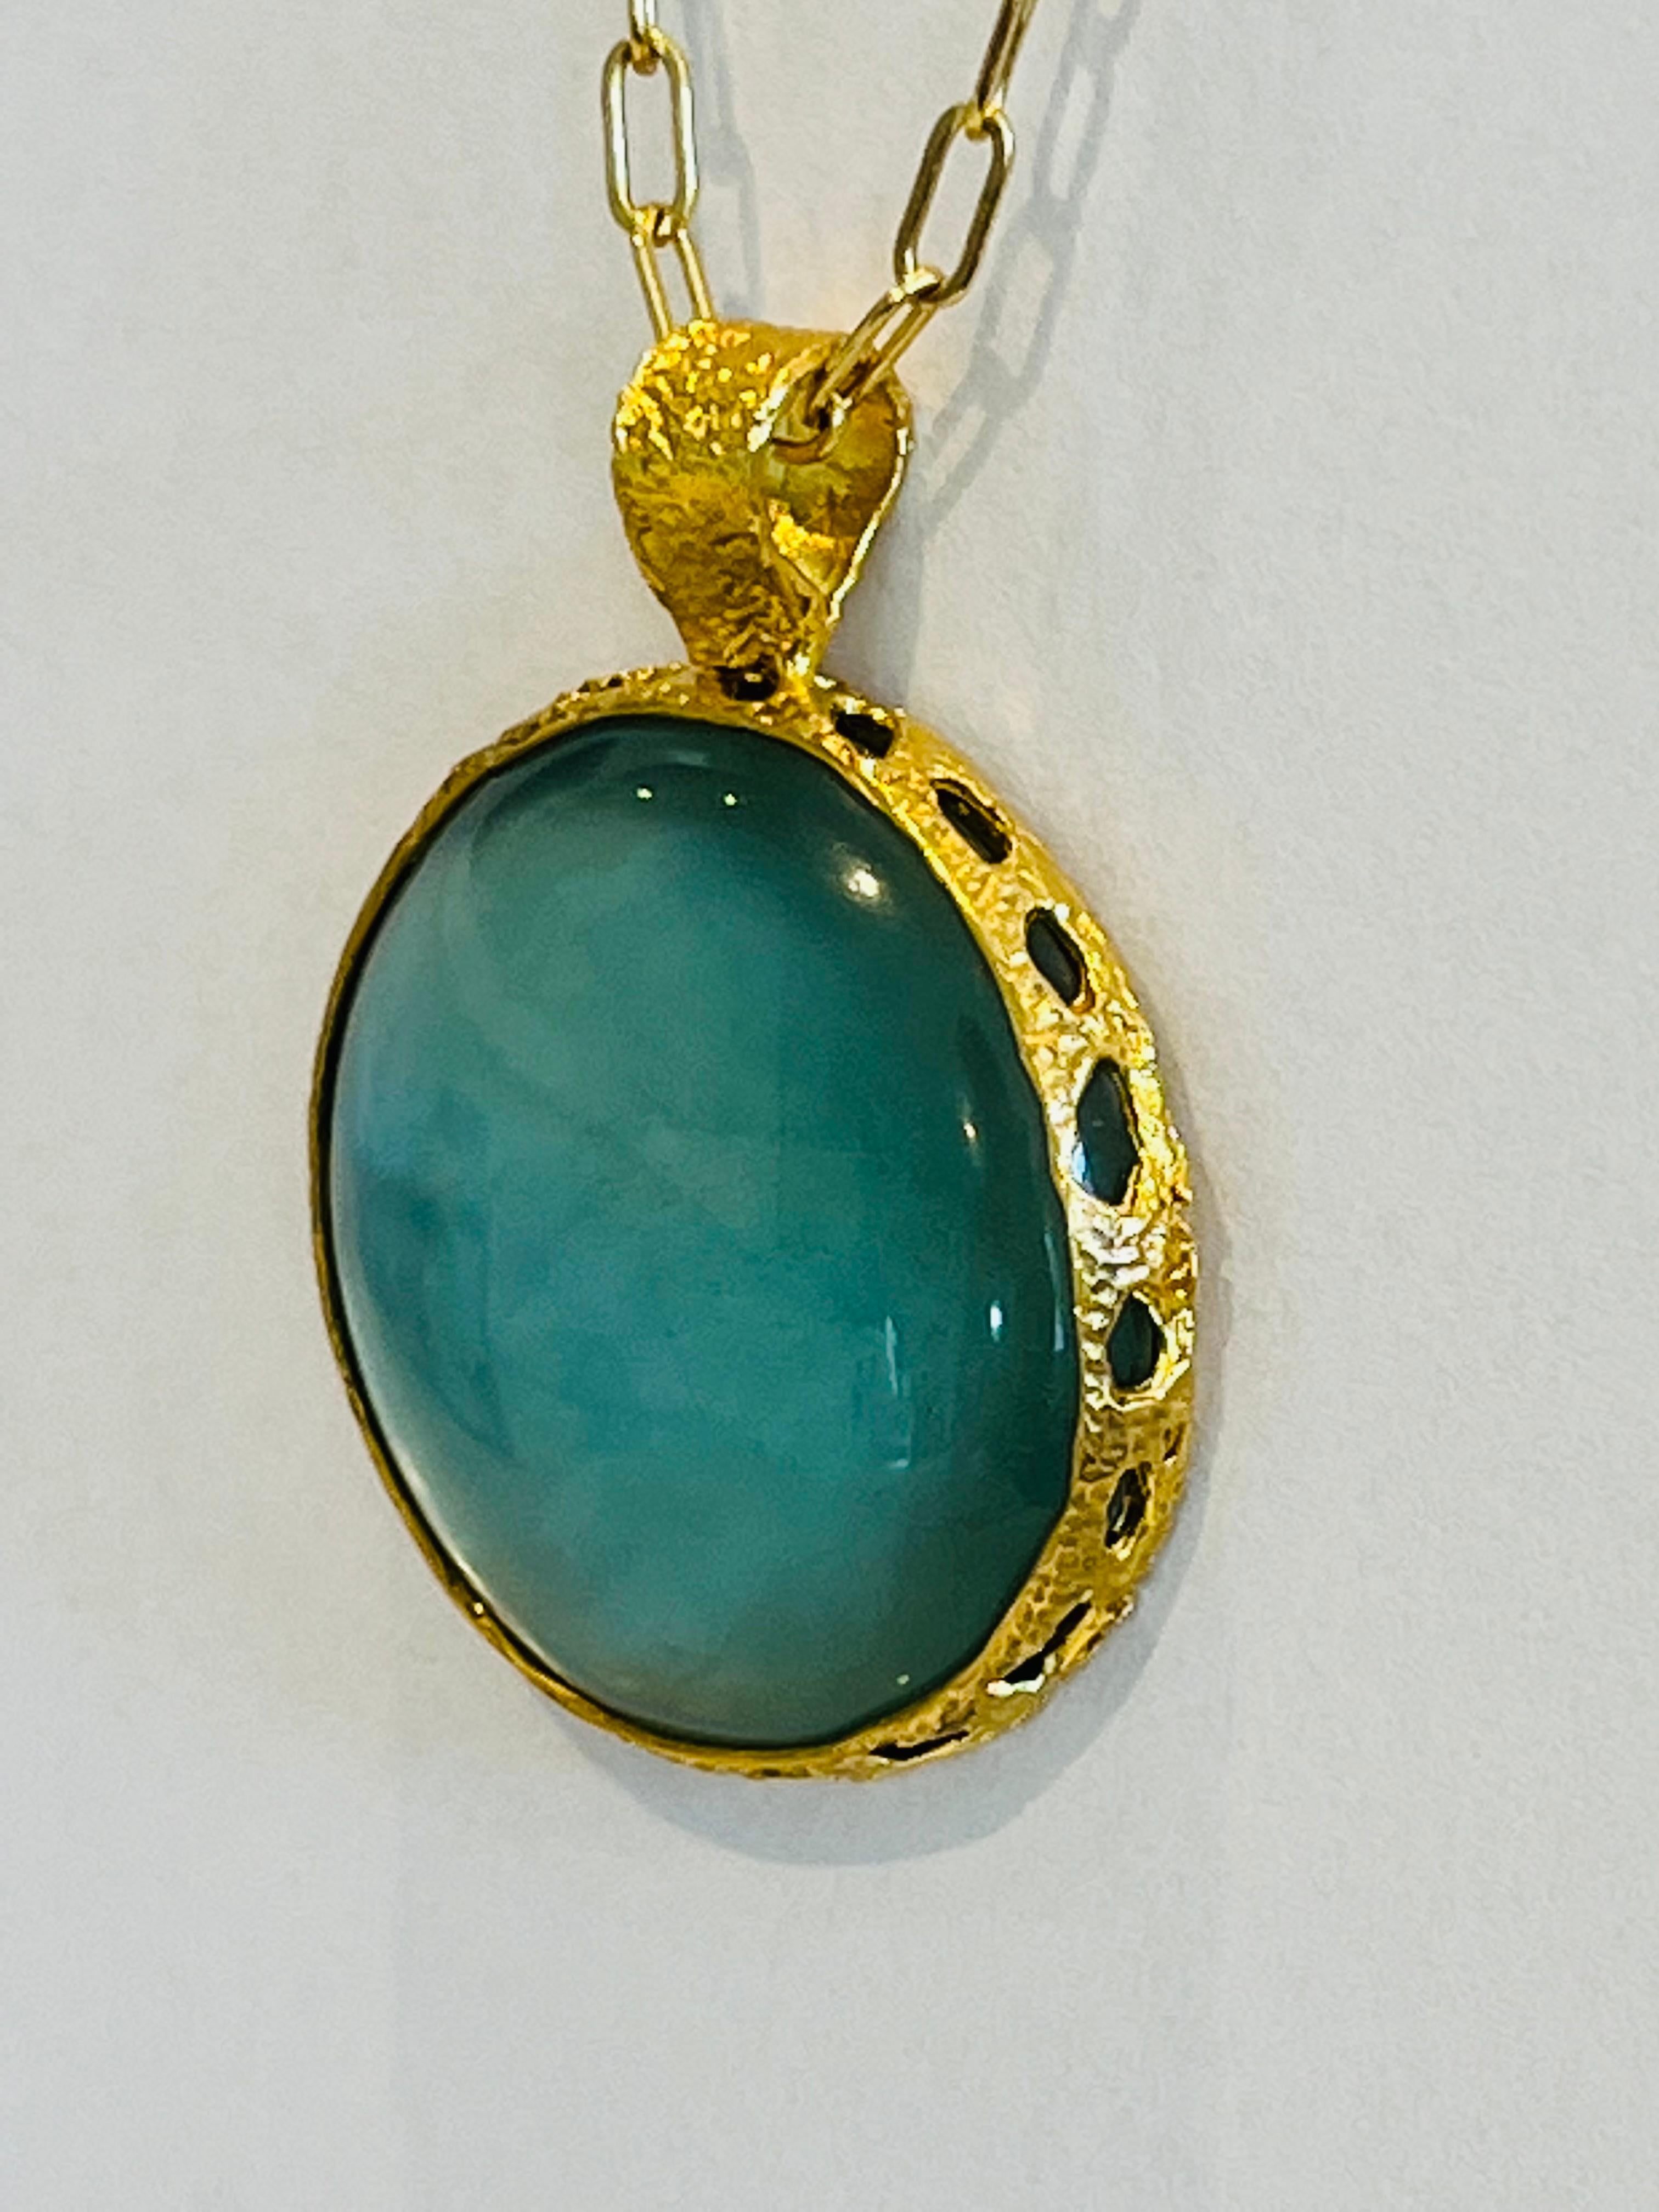 Round Cut Celeste Reversible Aqua and Mother of Pearl Pendant in 22k Gold, by Tagili